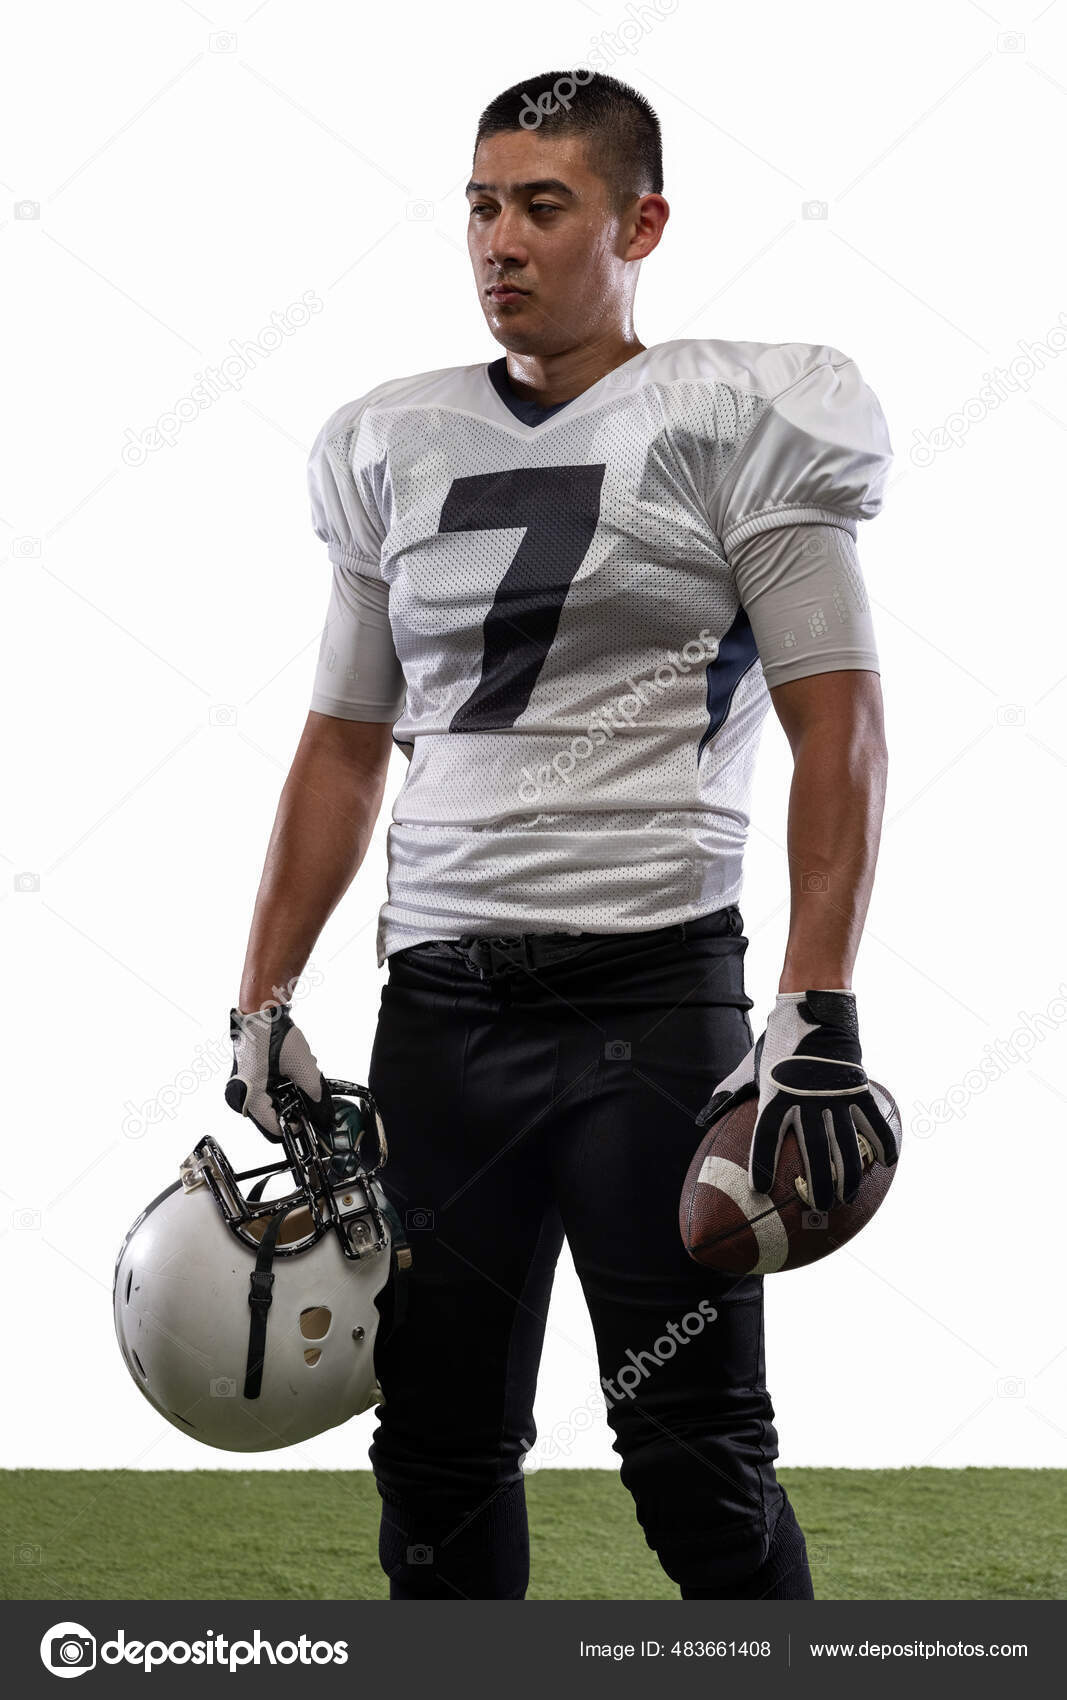 Football Jersey On White Jersey, Athlete, Champion, Competition